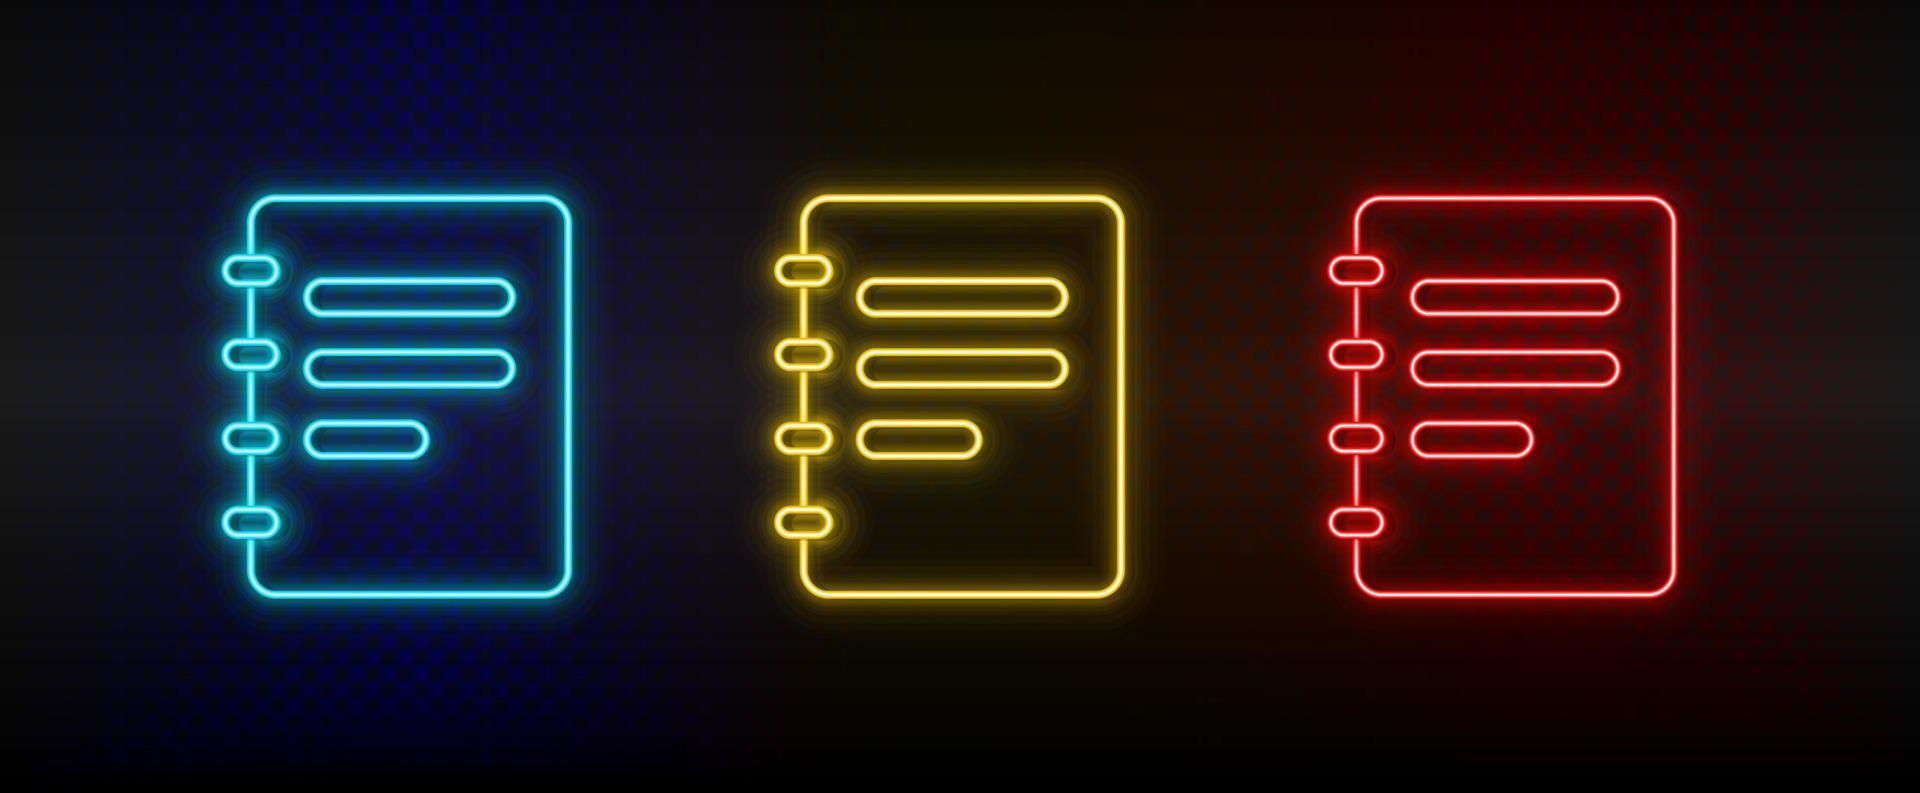 Neon icons, jotter, notebook. Set of red, blue, yellow neon vector icon on darken transparent background